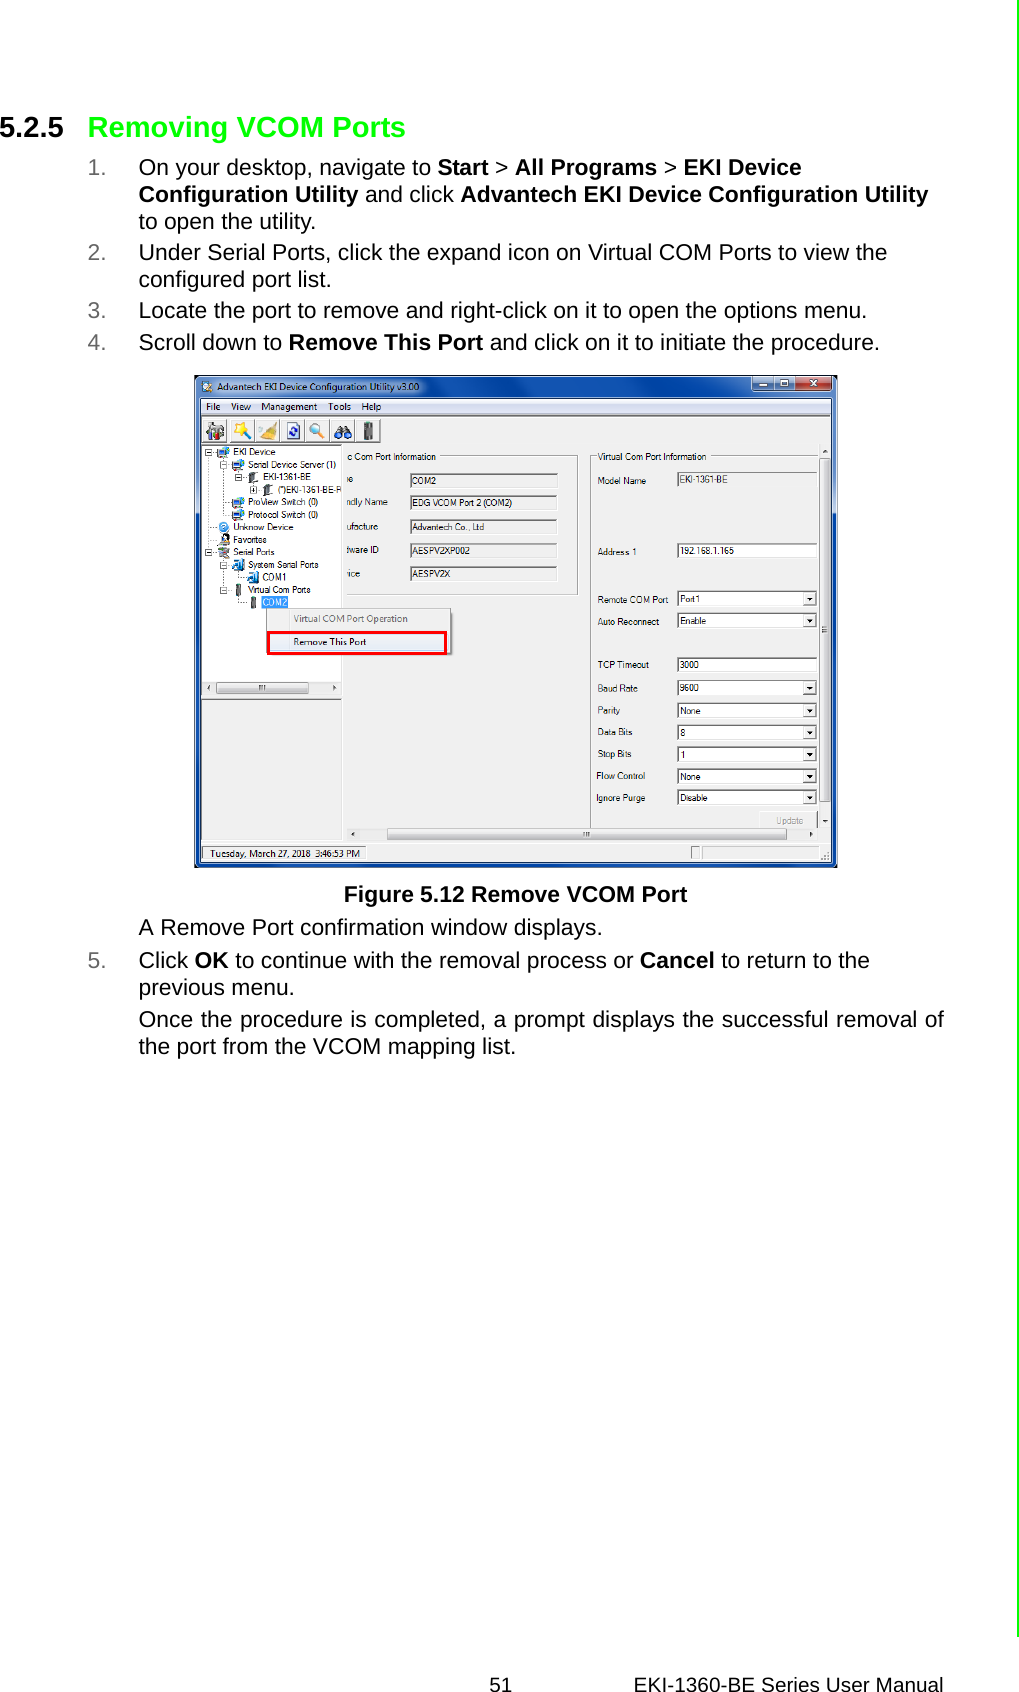 51 EKI-1360-BE Series User Manual 5.2.5 Removing VCOM Ports1. On your desktop, navigate to Start &gt; All Programs &gt; EKI Device Configuration Utility and click Advantech EKI Device Configuration Utility to open the utility.2. Under Serial Ports, click the expand icon on Virtual COM Ports to view the configured port list.3. Locate the port to remove and right-click on it to open the options menu.4. Scroll down to Remove This Port and click on it to initiate the procedure.Figure 5.12 Remove VCOM PortA Remove Port confirmation window displays.5. Click OK to continue with the removal process or Cancel to return to the previous menu.Once the procedure is completed, a prompt displays the successful removal ofthe port from the VCOM mapping list.